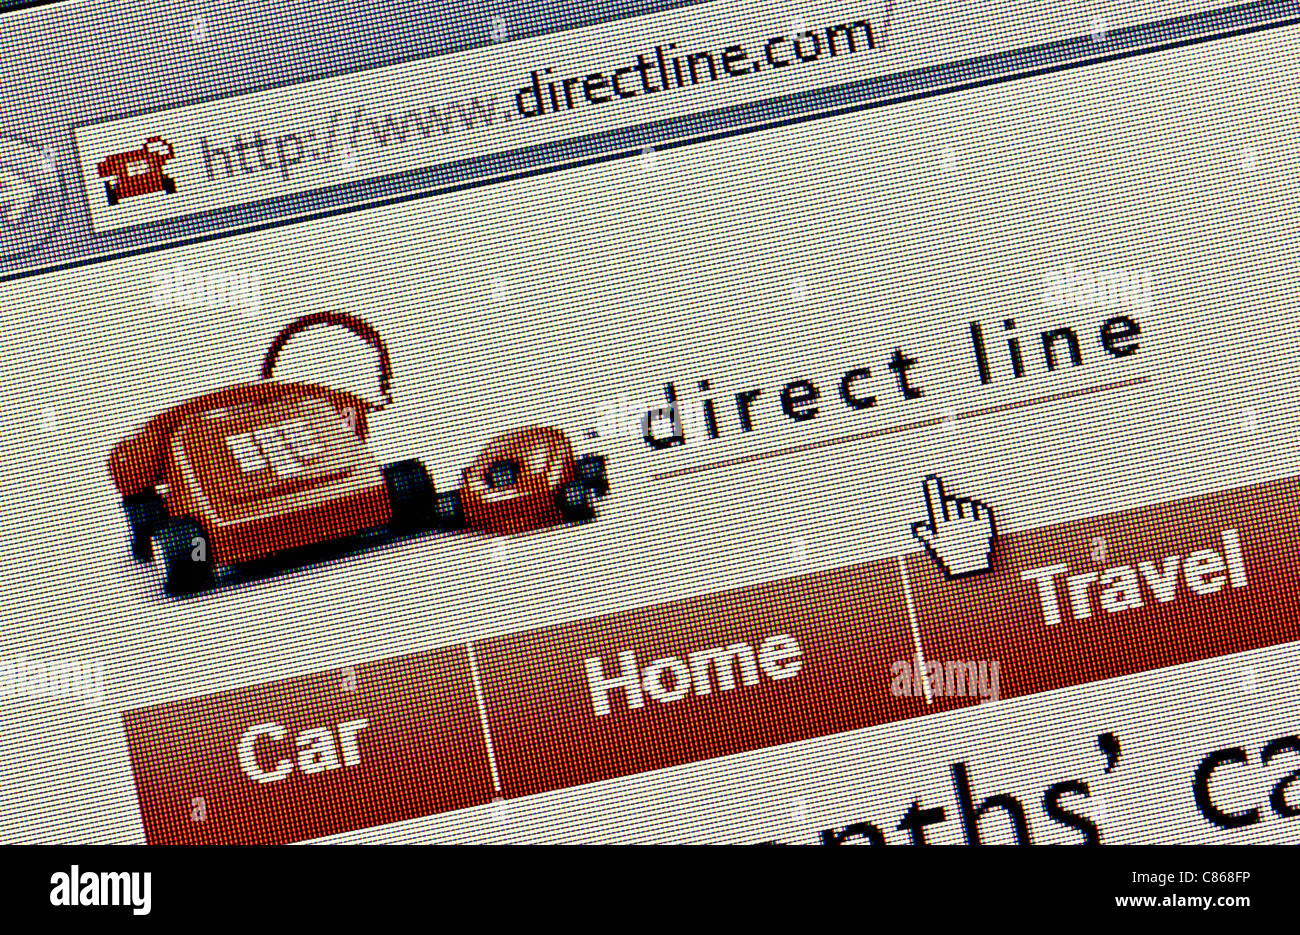 Direct Line logo and website close up Stock Photo